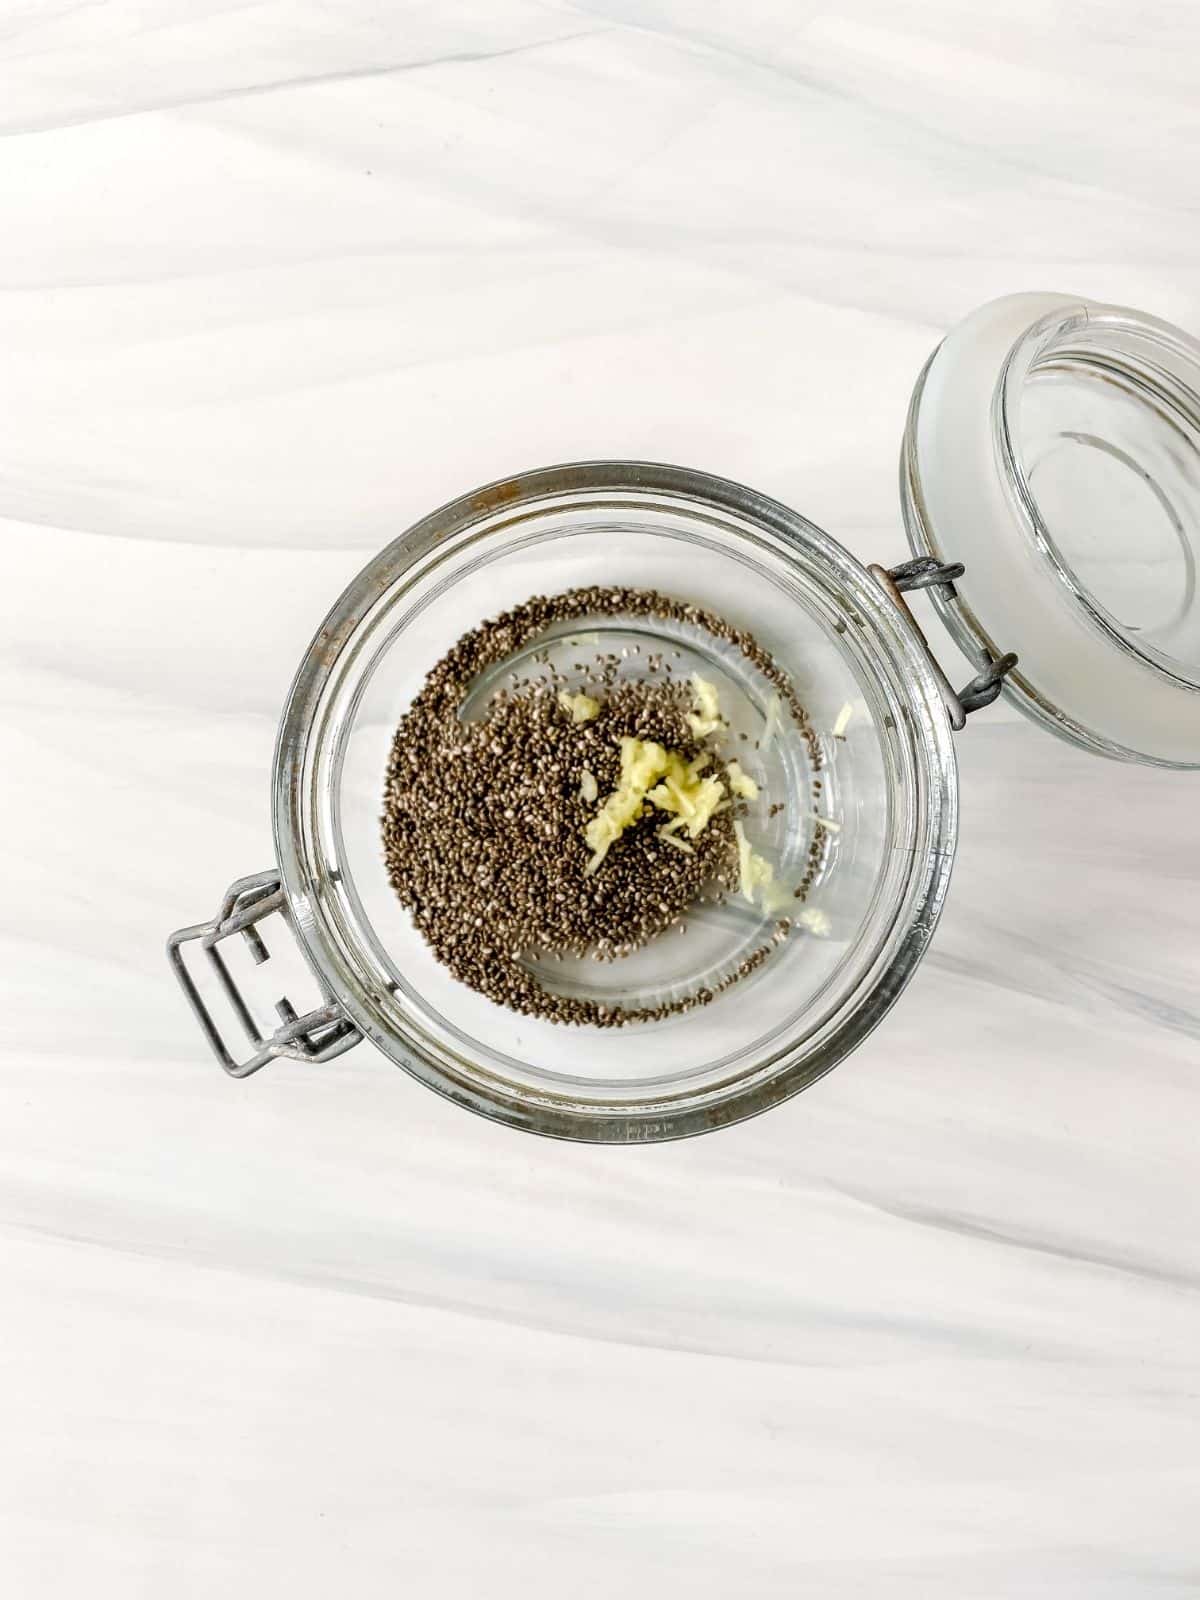 chia seeds and grated ginger in a glass jar.